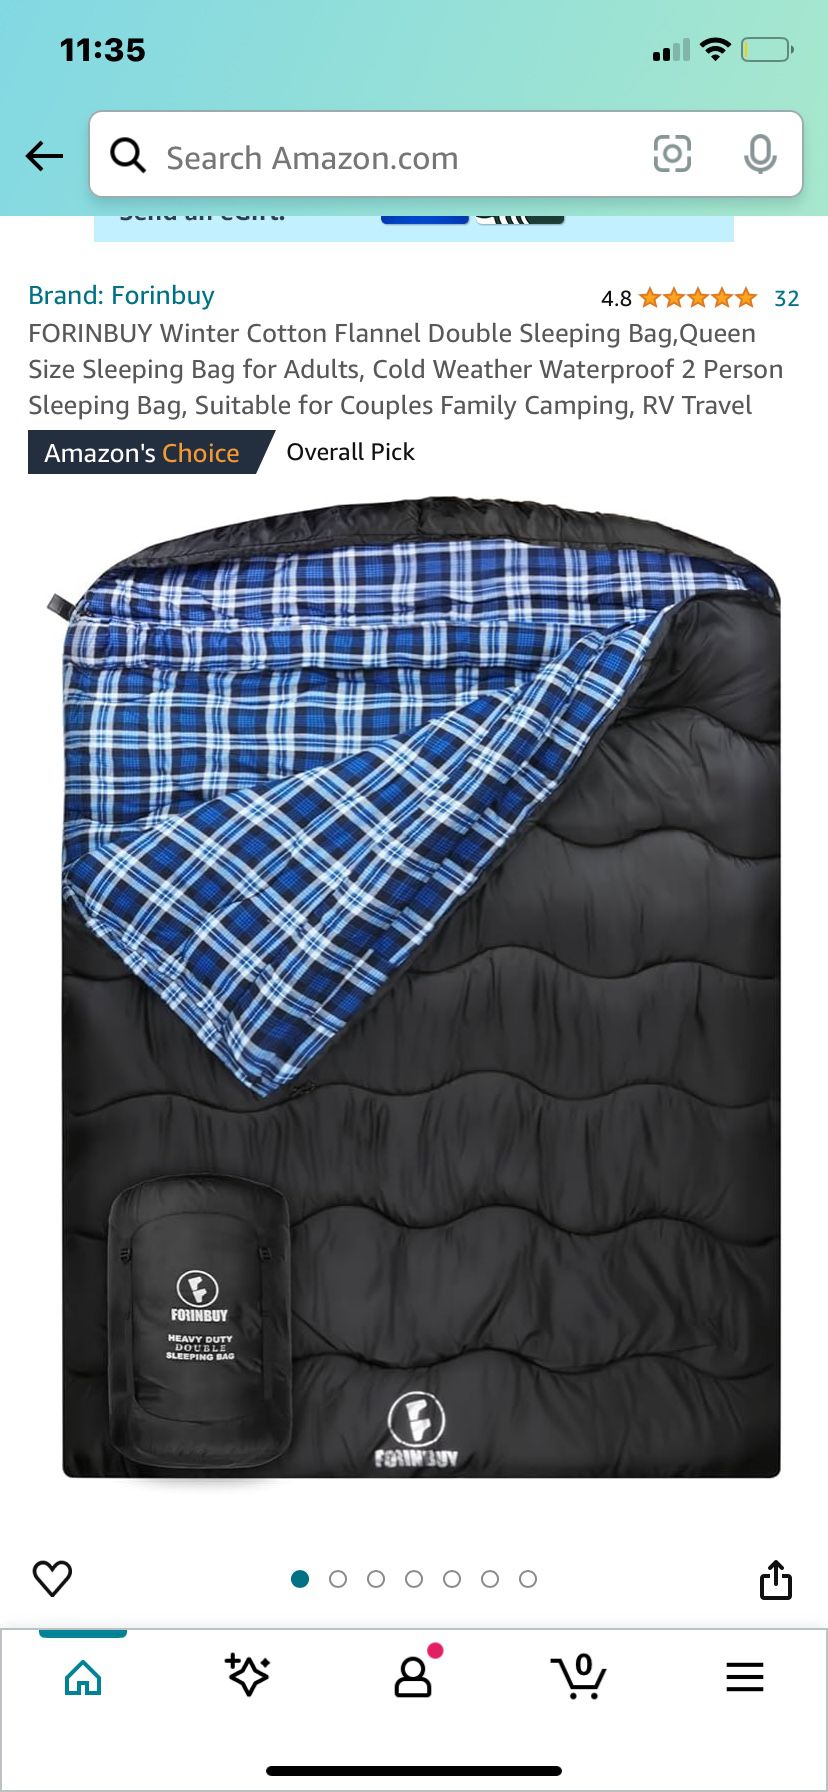 FORINBUY Winter Cotton Flannel Double Sleeping Bag,Queen Size Sleeping Bag For Adults, Cold Weather Waterproof 2 Person Sleeping Bag, Suitable For Cou